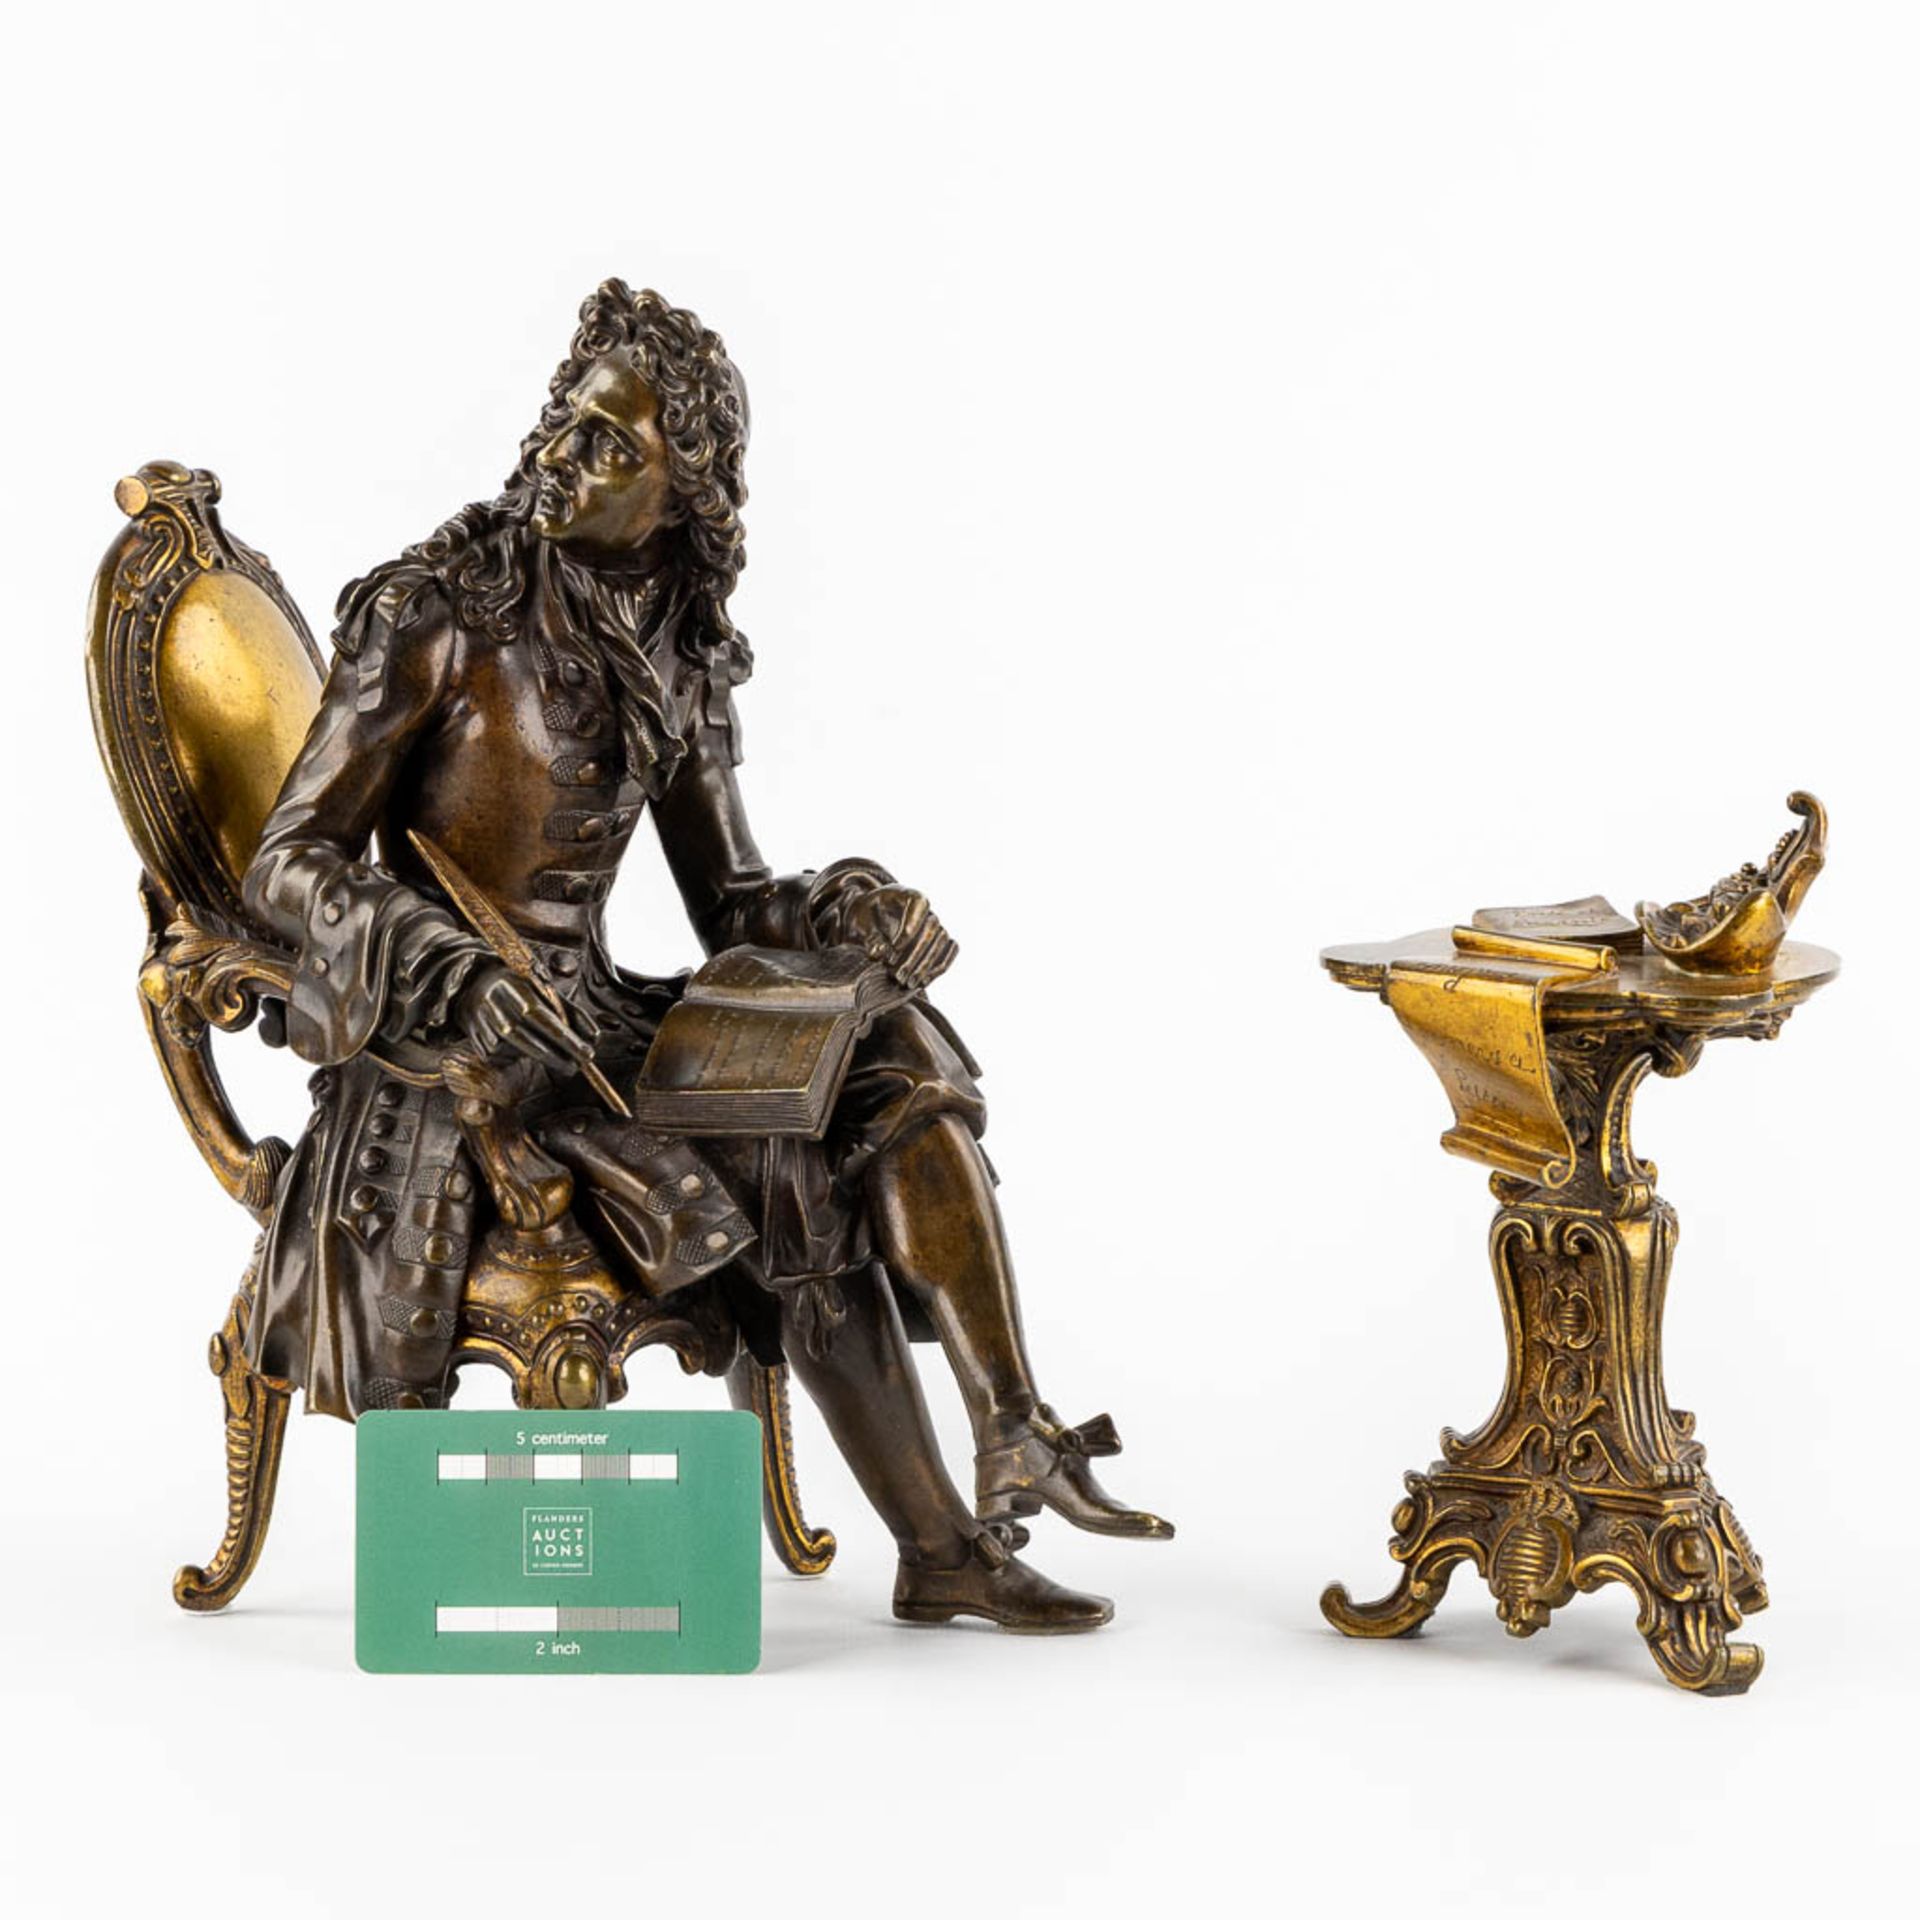 Pascal Collasse, a patinated and gilt bronze figurine. Circa 1900. (L:15 x W:25 x H:29 cm) - Image 2 of 13